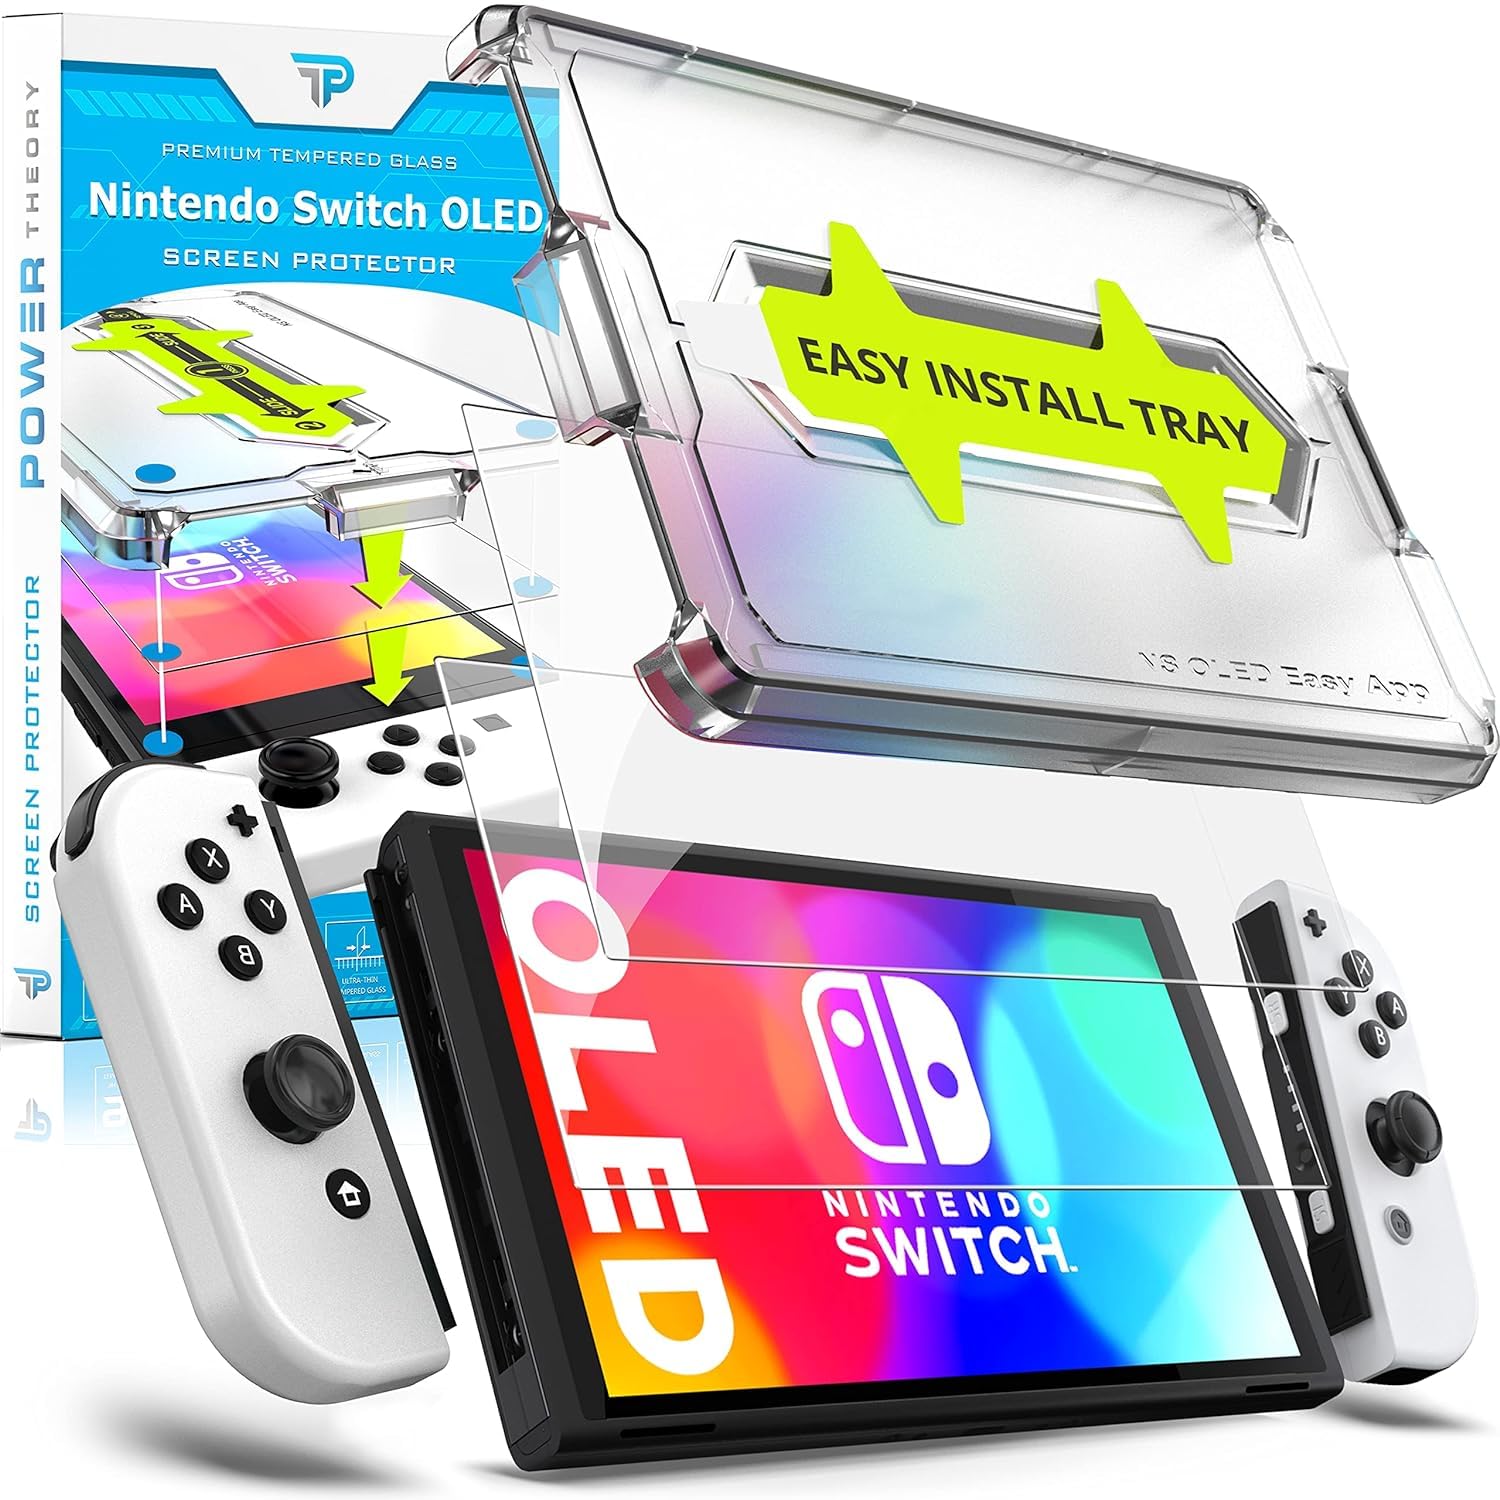 New World Designed for Nintendo Switch OLED Screen Protector Tempered Glass [9H Hardness], With Easy Install Kit,Bubble Free Clear,Anti-Scratch, 2 PC